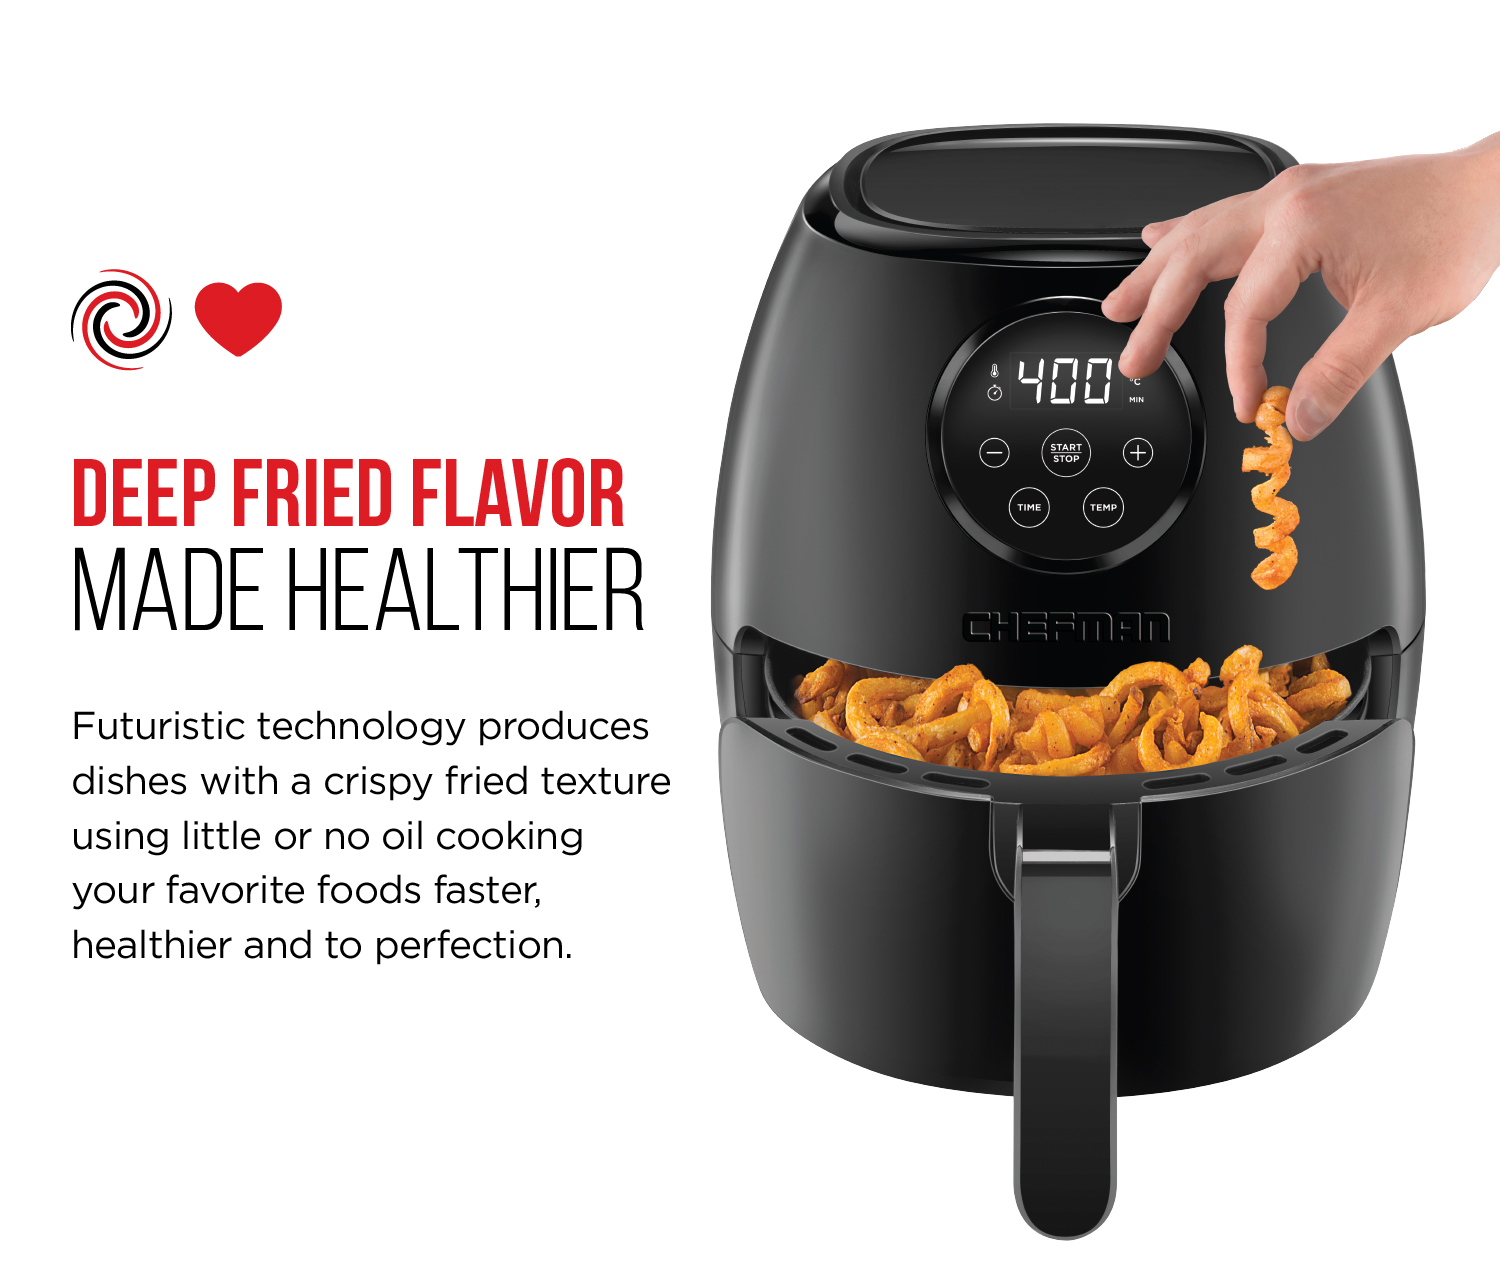 Chefman TurboFry Digital Touch Air Fryer Oven, 3.6 Quart Capacity, Oil-Free Frying, Matte Black - image 3 of 6